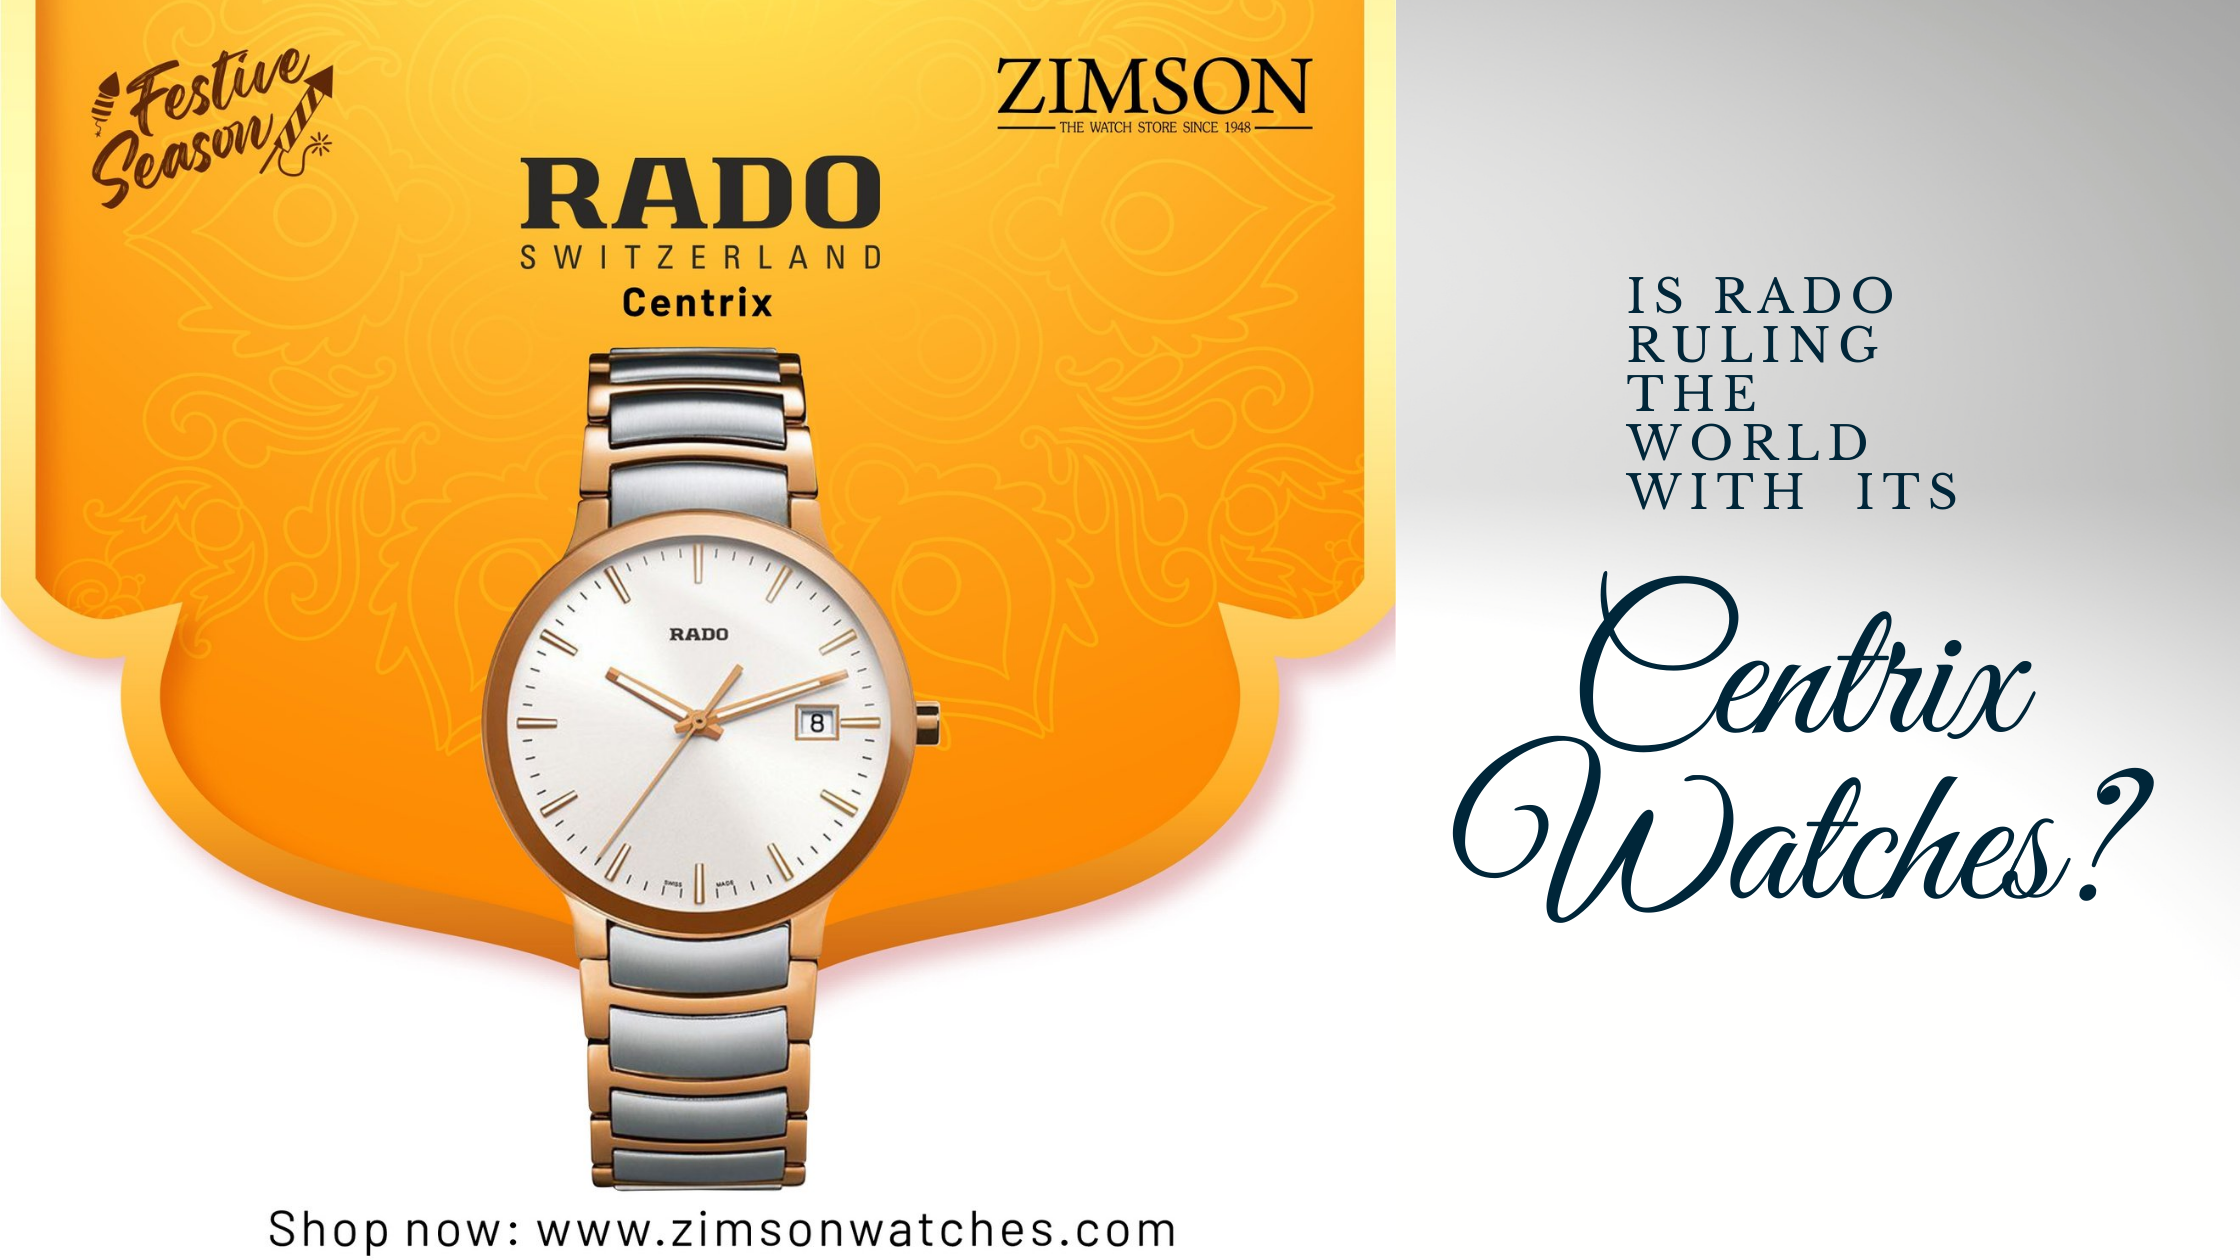 Rado watches: history, innovations and best models